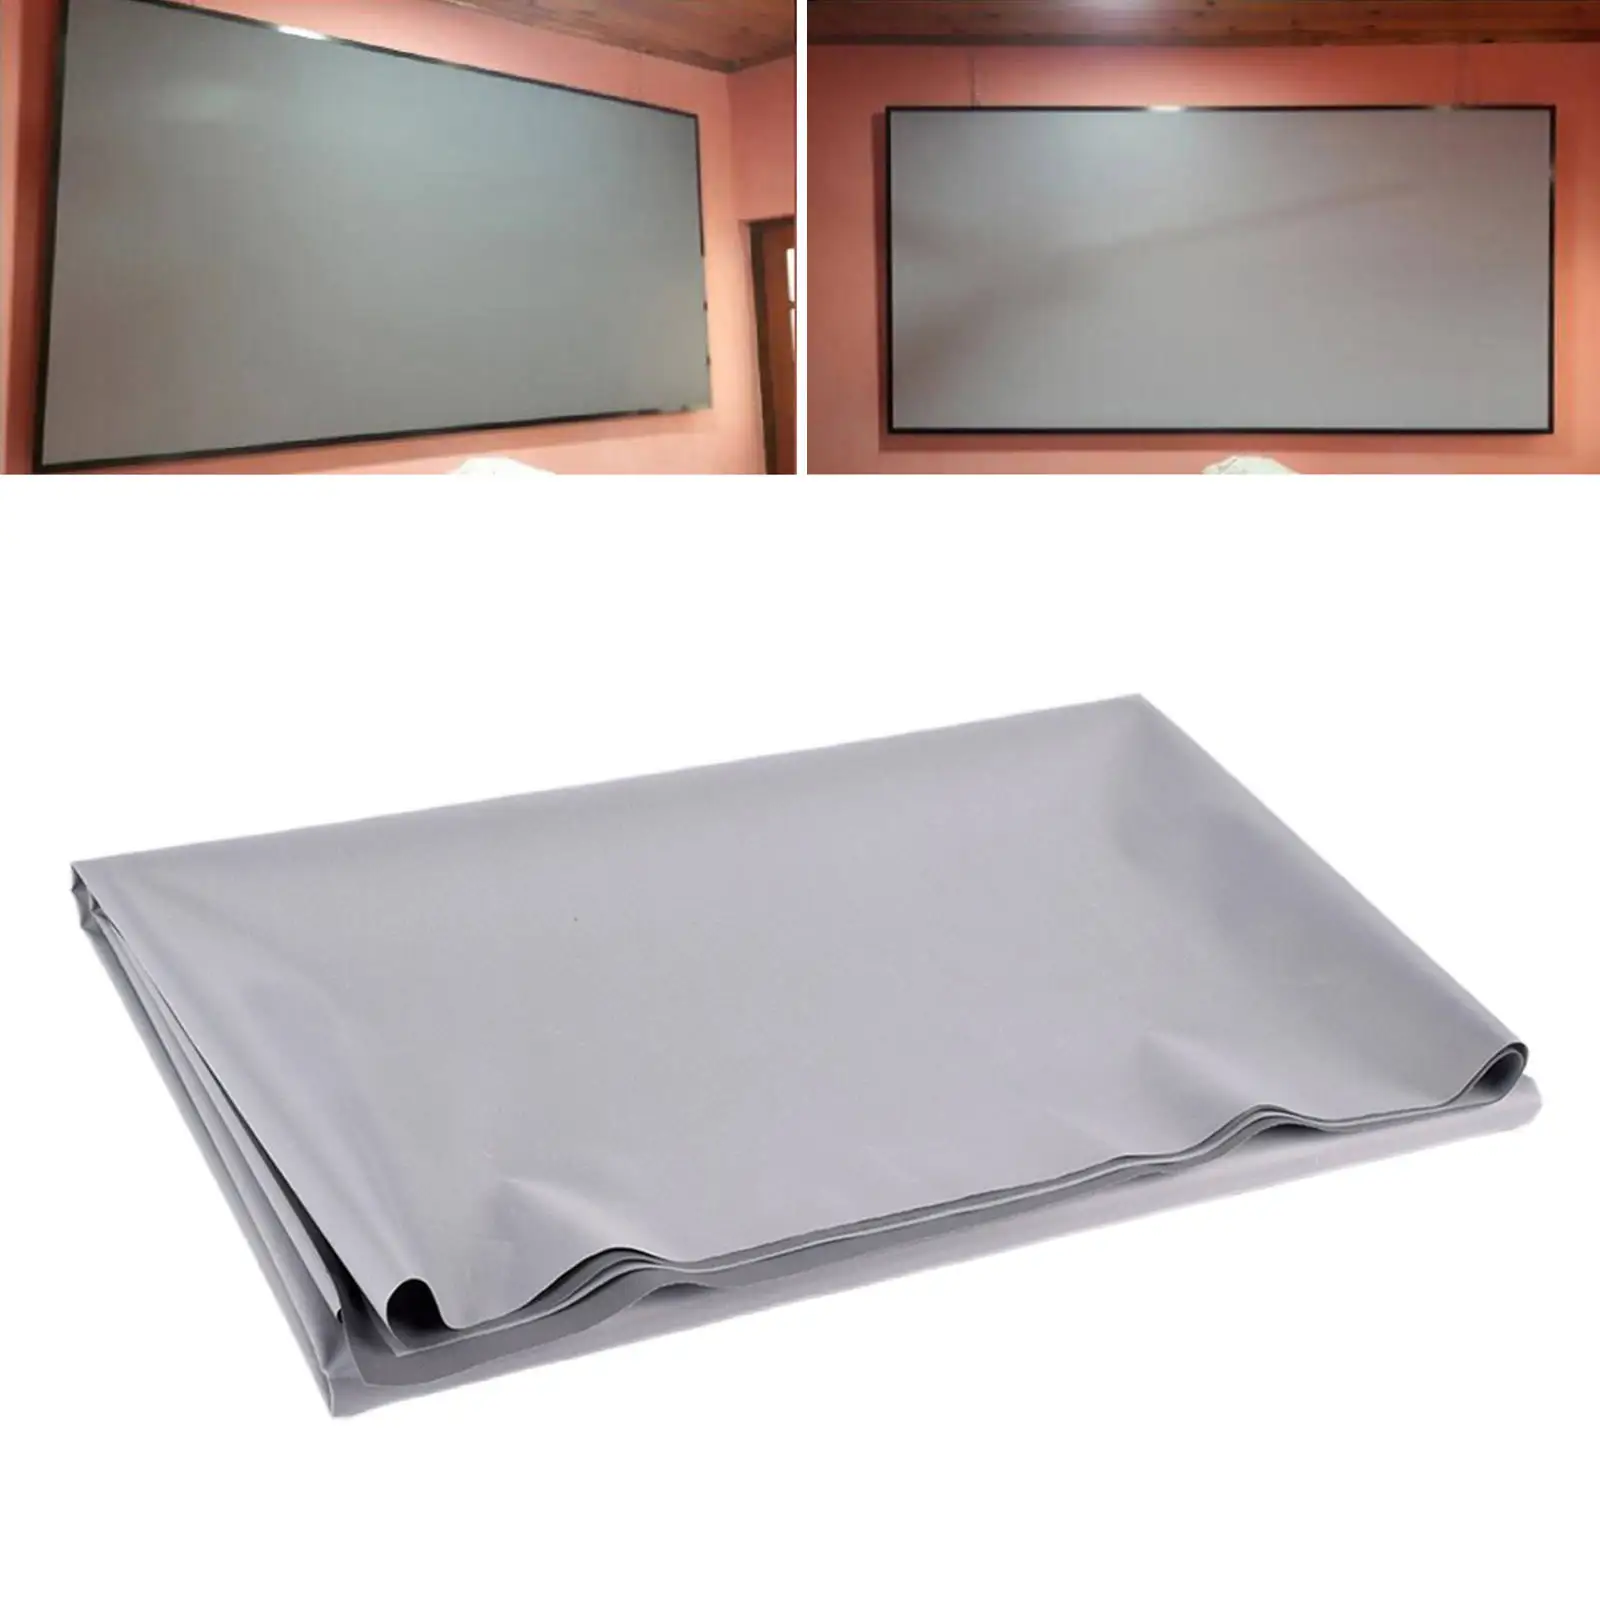 Portable Projector Screen 4K Full HD Projection Screen Projector Curtain Canvas for Backyard Movie Theater Office Outdoor